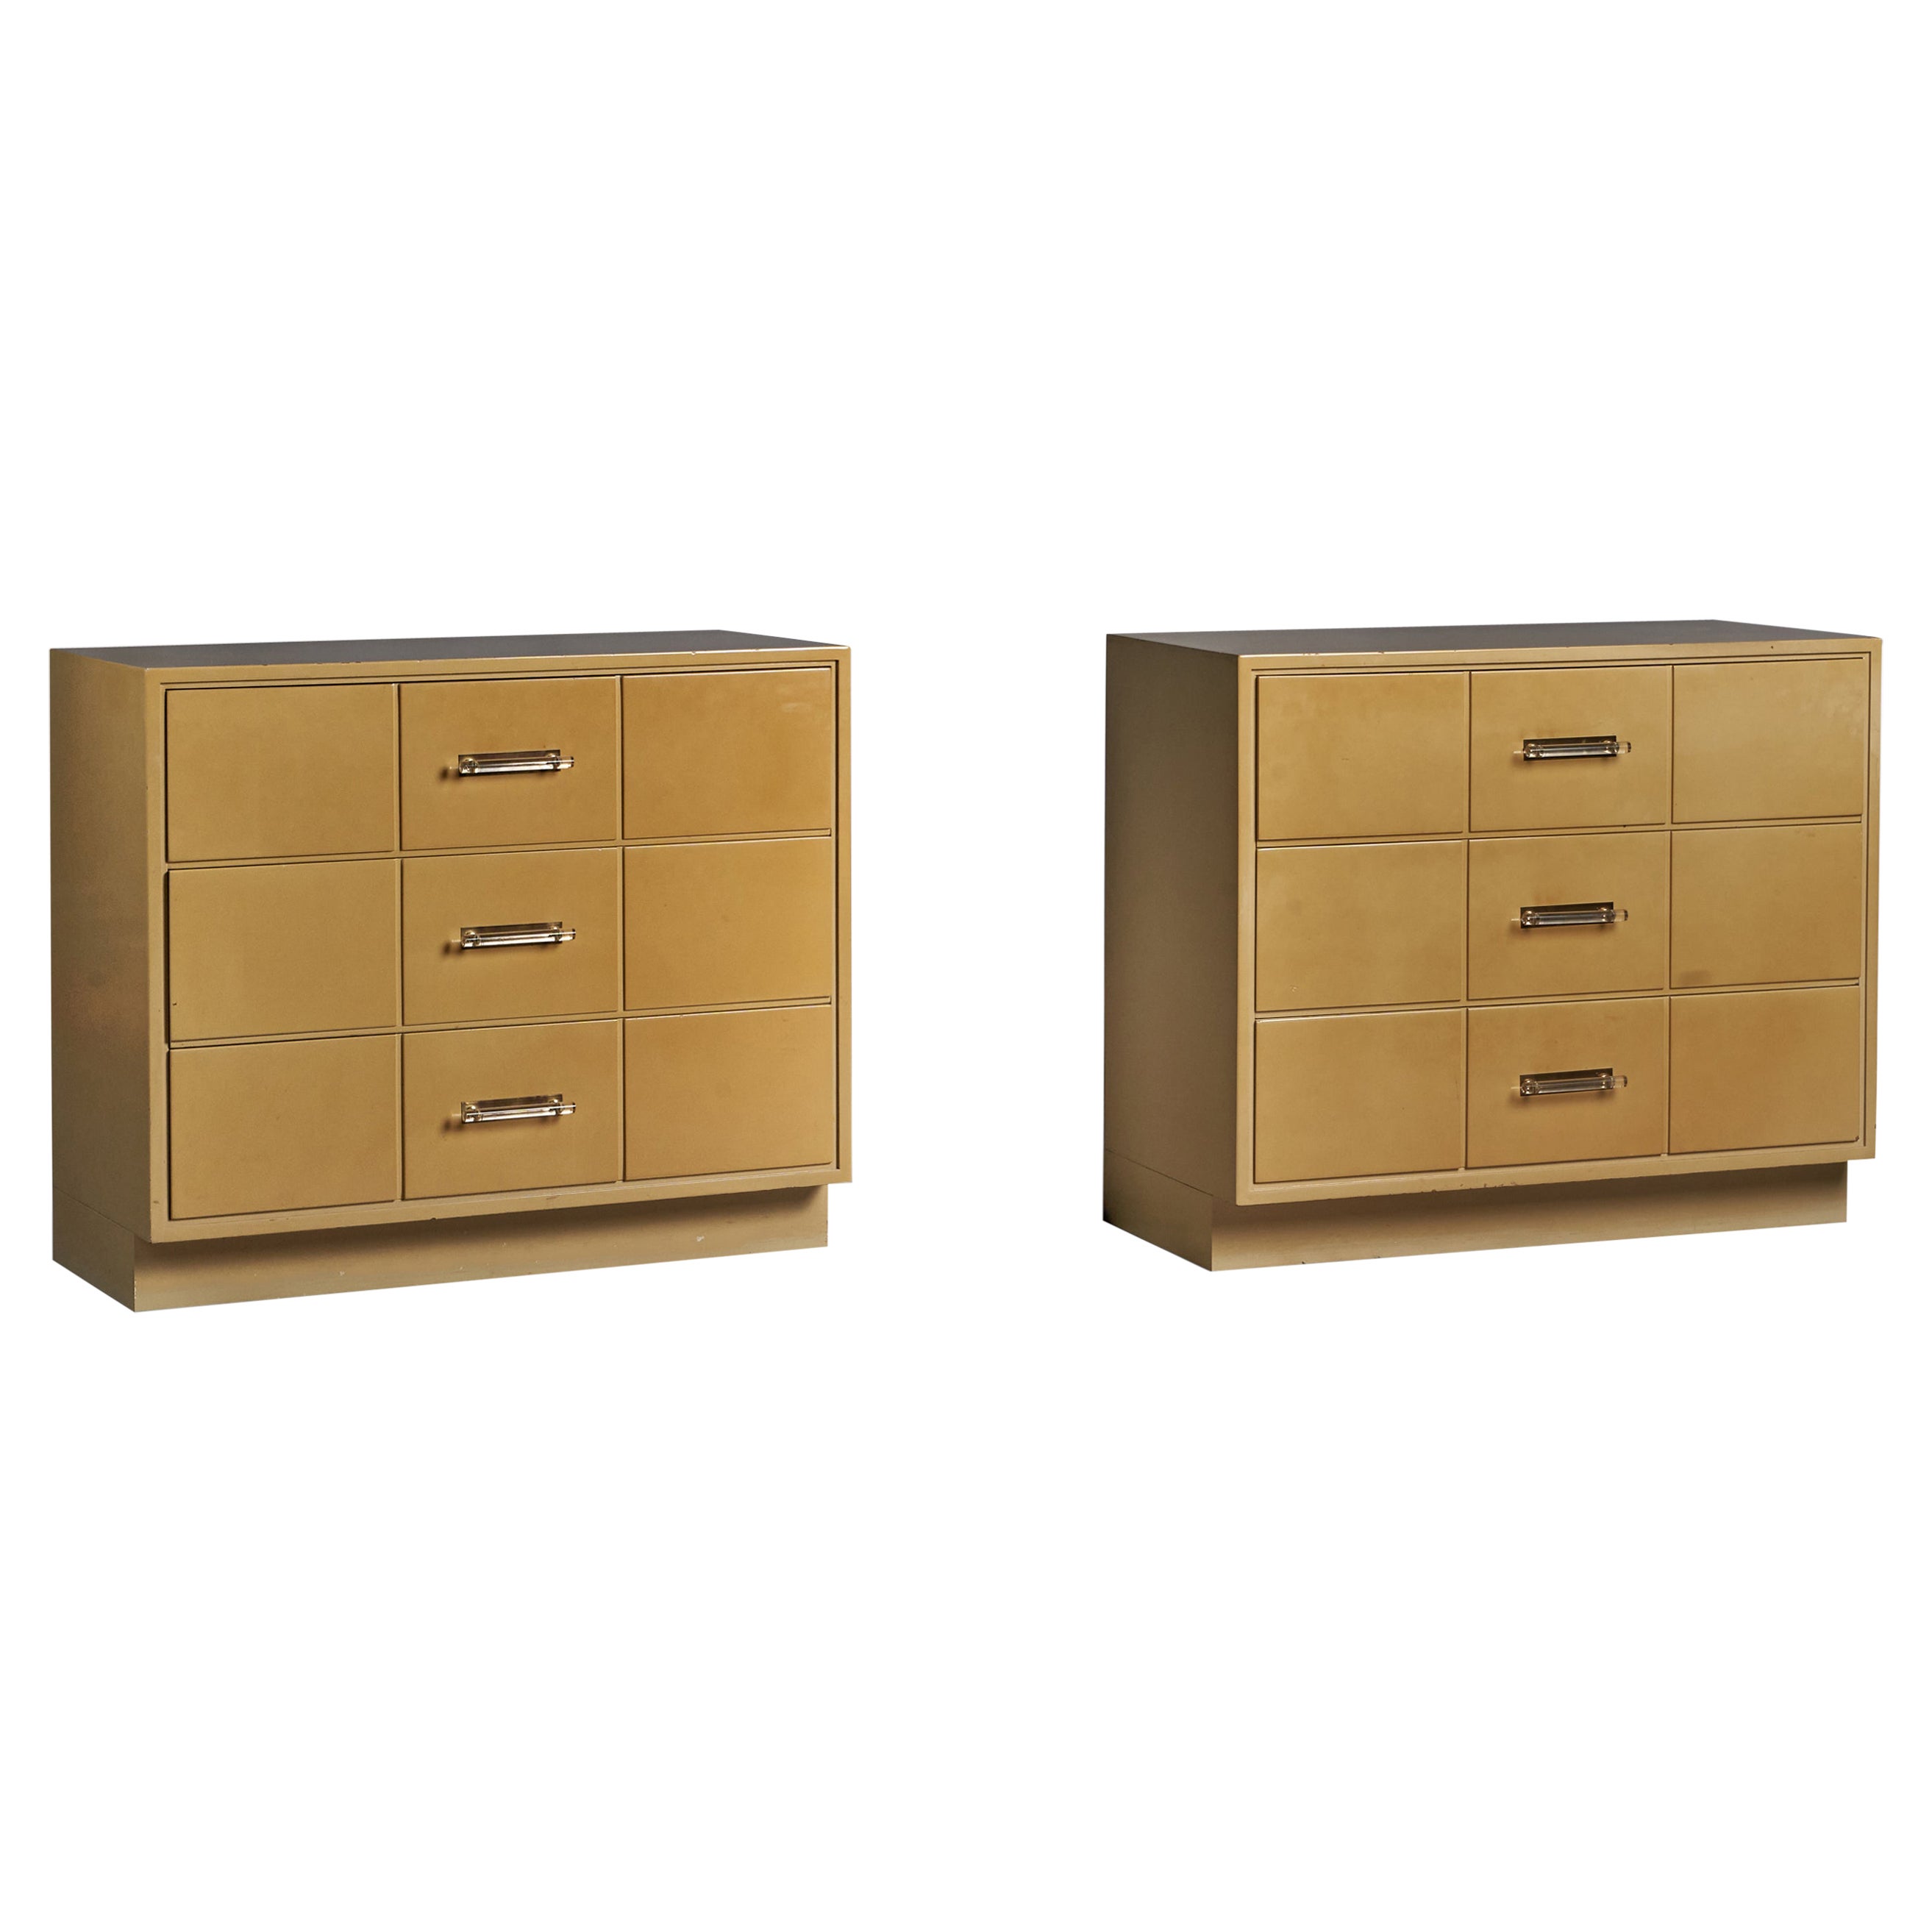 Tommi Parzinger, Chest of Drawers, Wood, Brass, Lucite, USA, 1950s For Sale